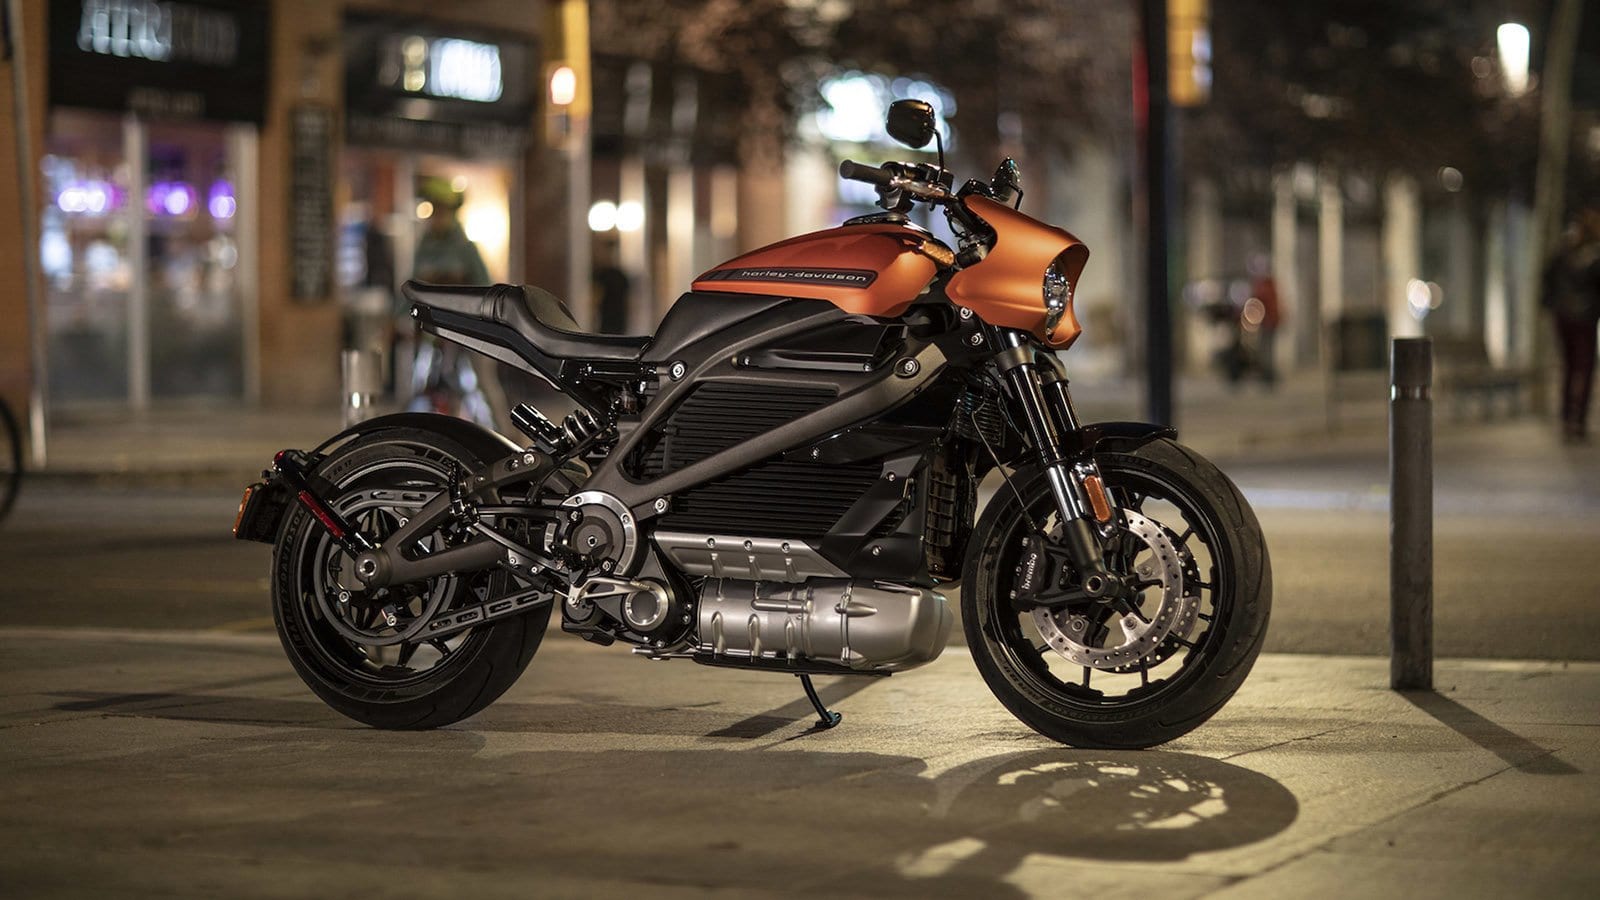 2019 Harley Livewire electric motorcycle